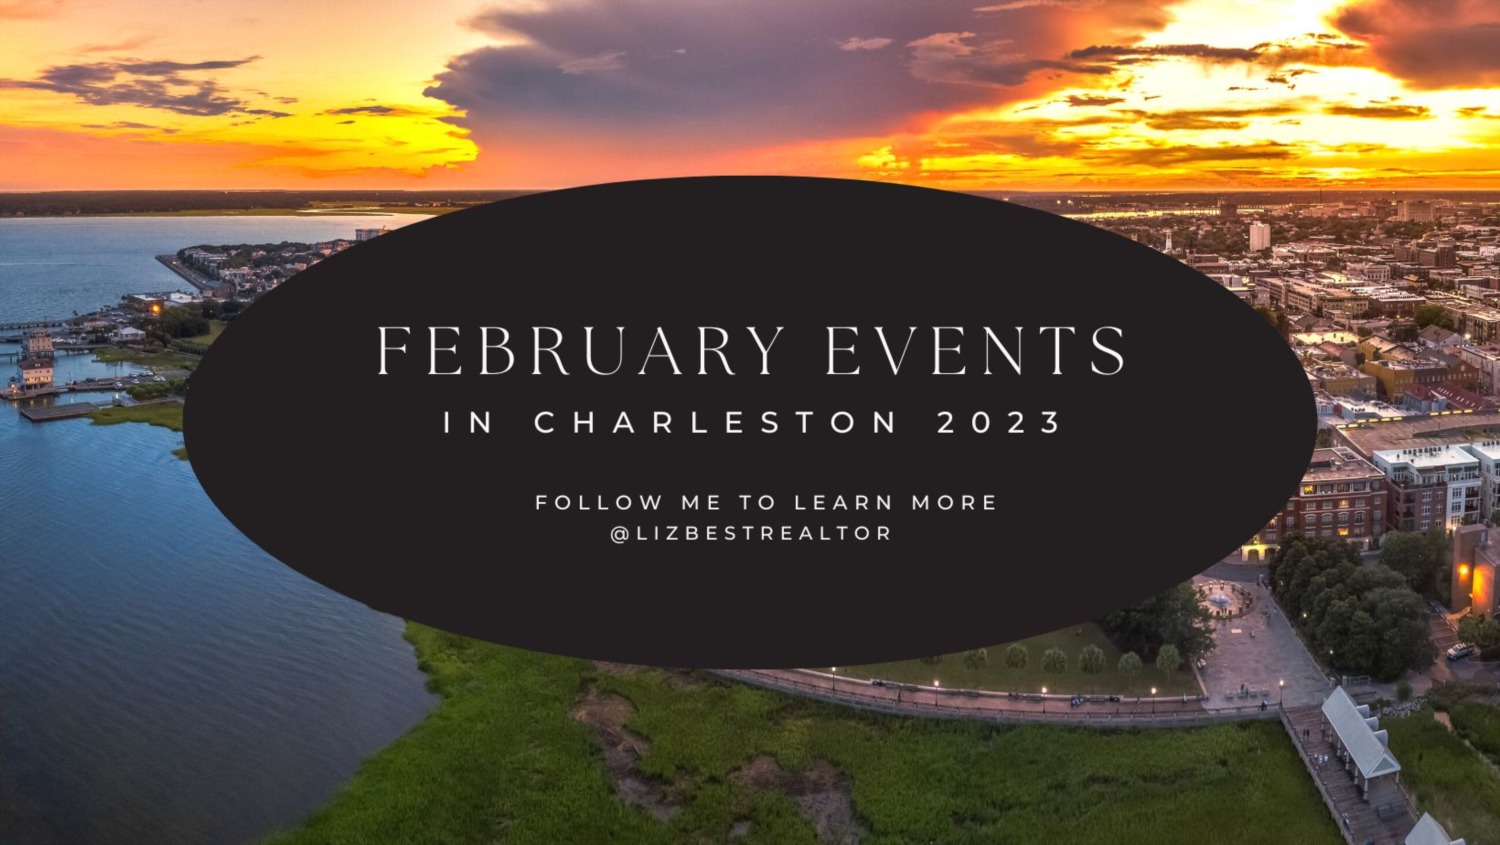 Things to do in Charleston February 2023